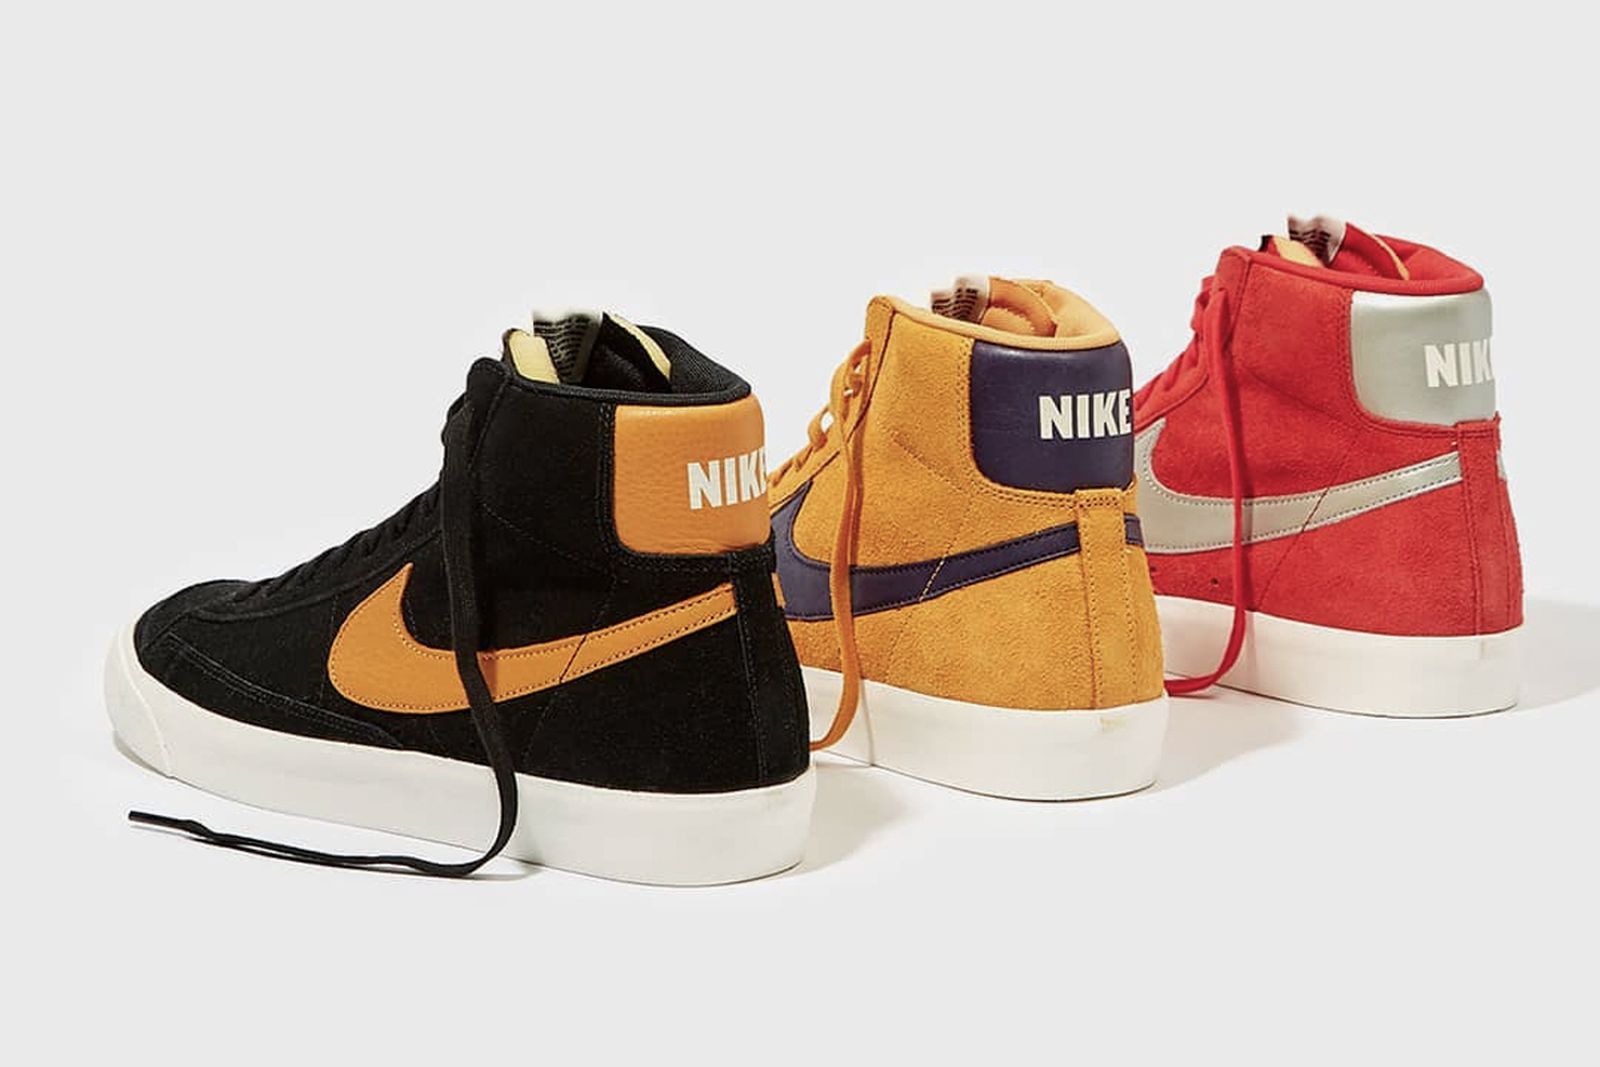 insert currency Draw a picture What to Expect From the Nike Blazer's 50th Anniversary